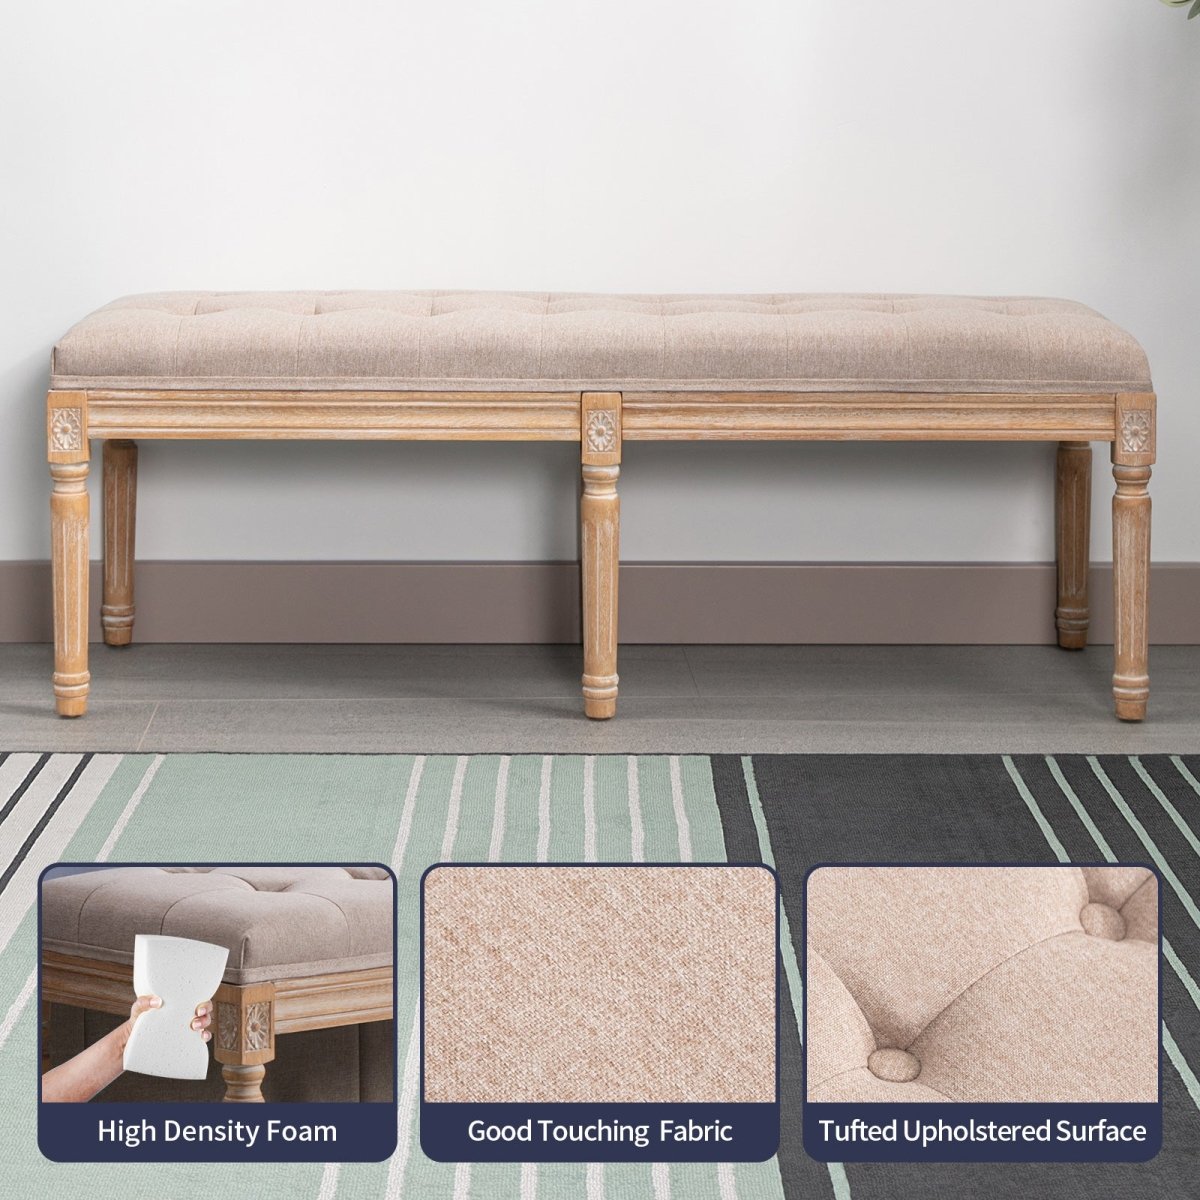 Ottoman Bench with Storage,Linen Fabric Upholstered Bench Bedroom